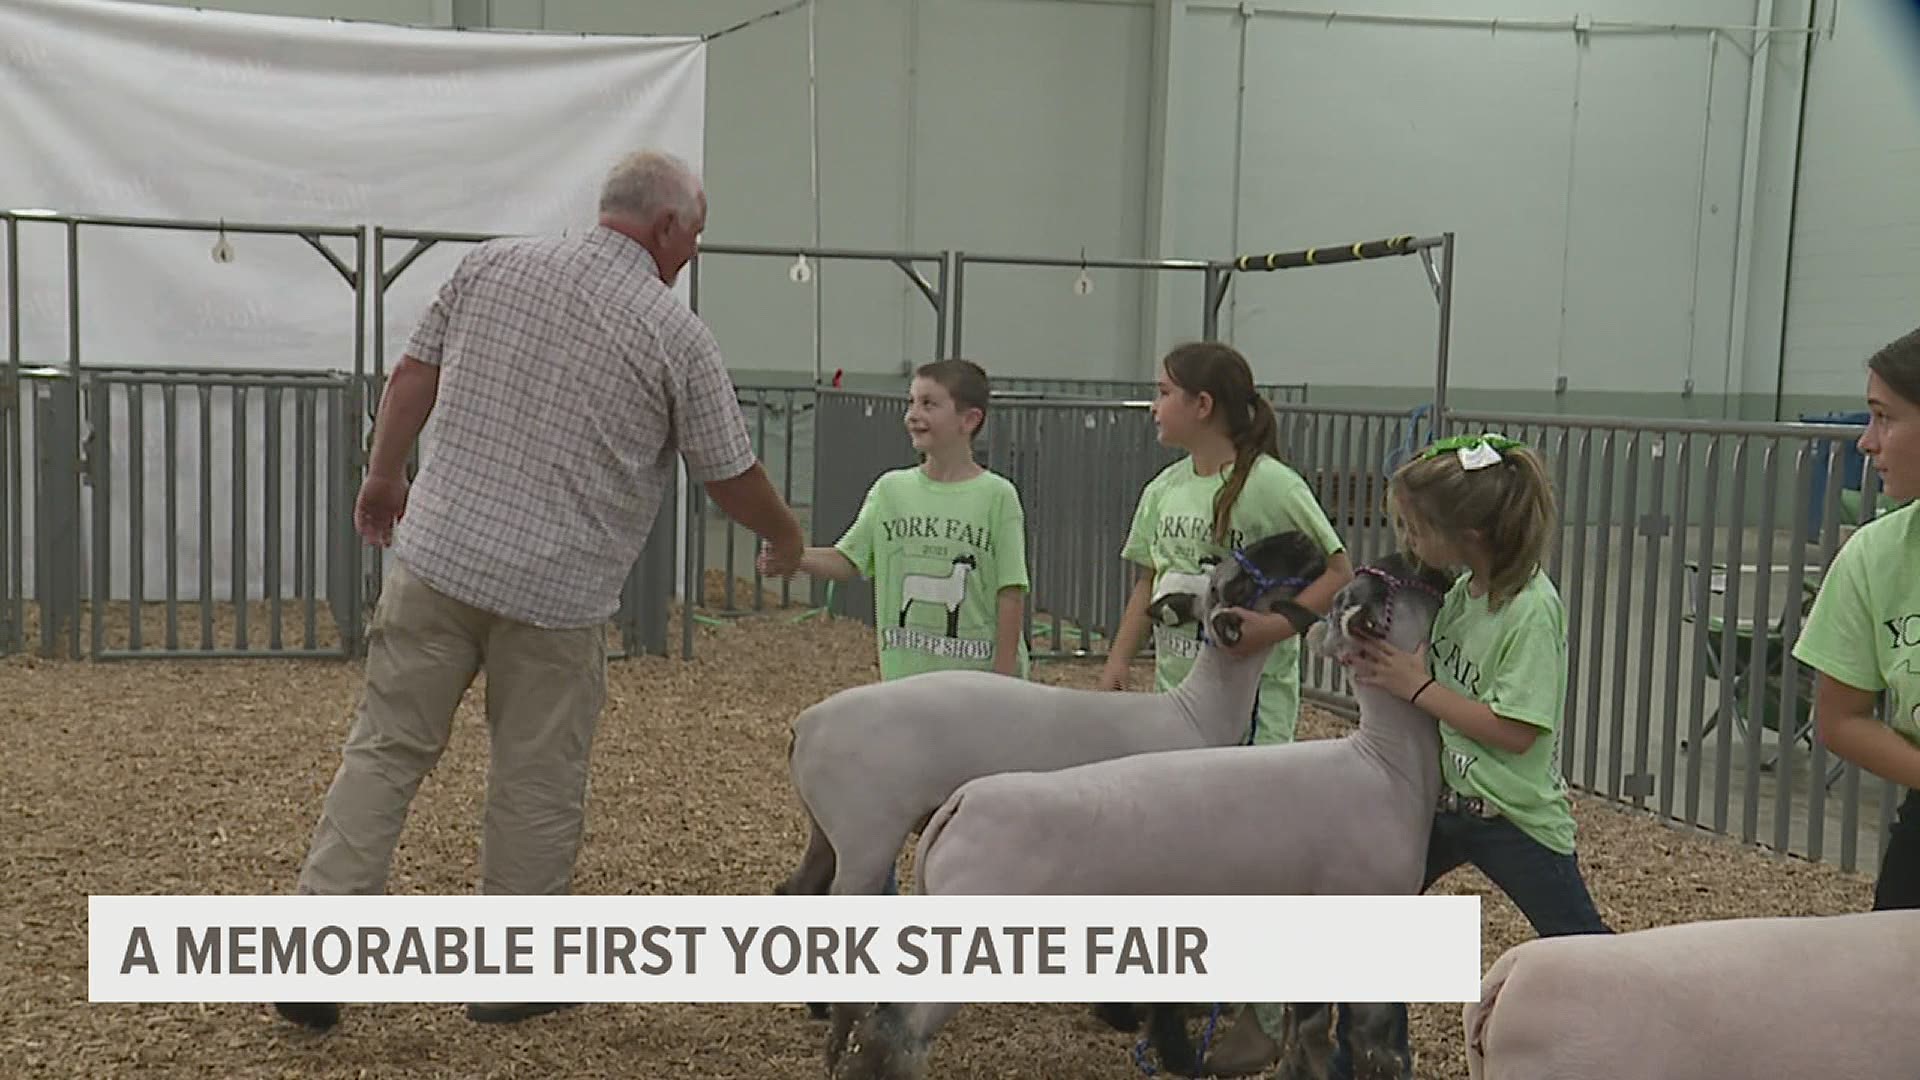 Eli Runkle has been given the greenlight by doctors to attend the York State Fair after receiving several medical procedures from contracting two strands of E.coli